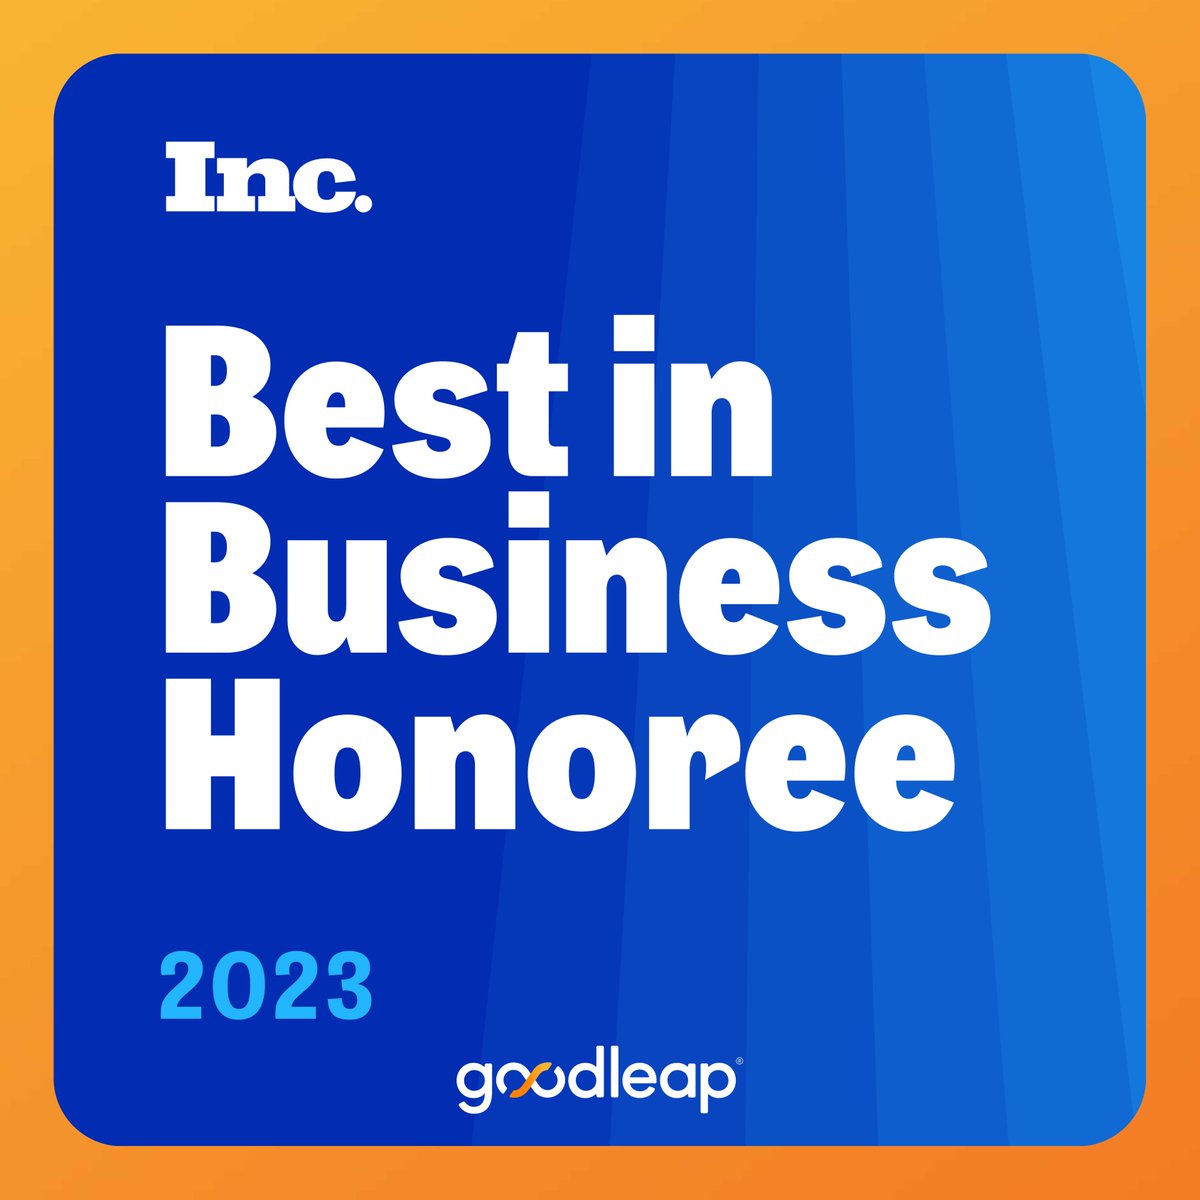 GoodLeap is excited to be an honoree of @Inc  Magazine's 2023 #BestInBusiness Awards in the Financial Services category.

The annual Best In Business list celebrates companies making the biggest impact on their communities, industries, the environment, and society.

See the full…